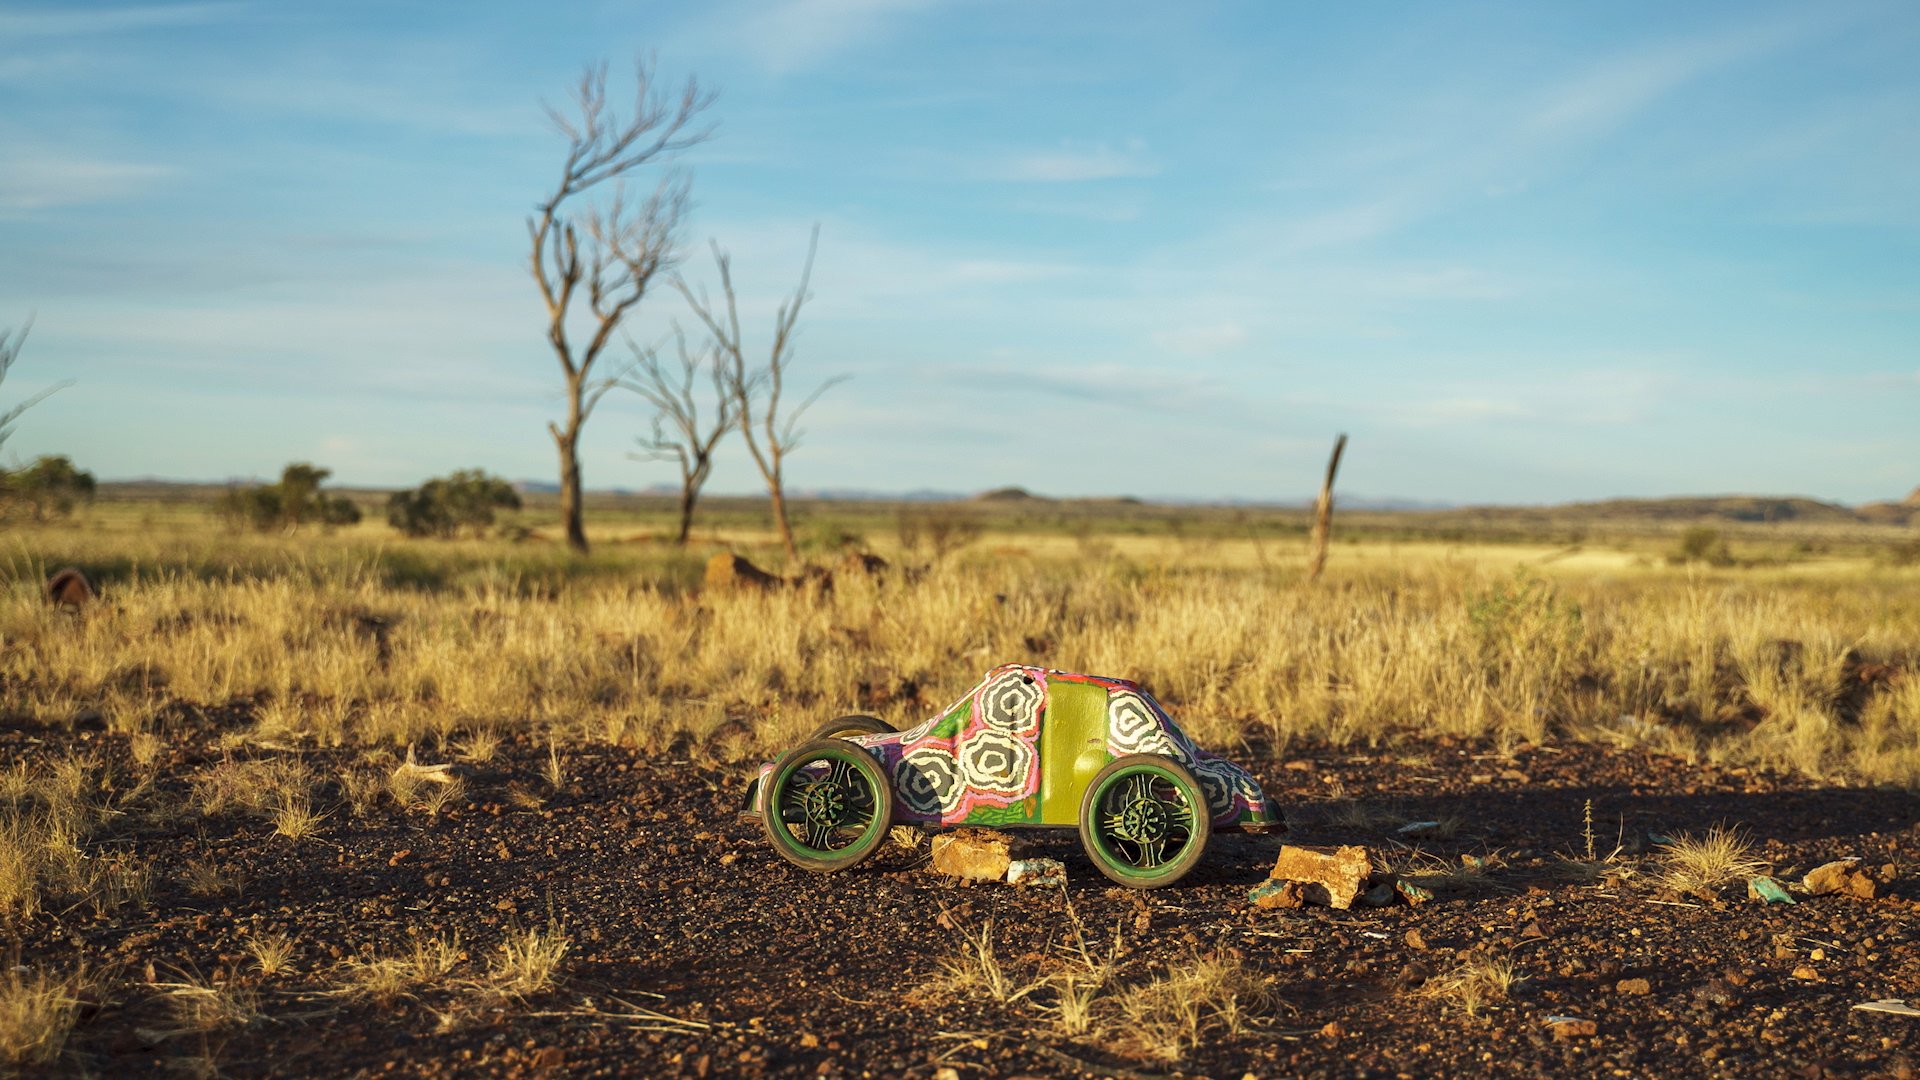  Noreen Parker,  Camouflage army truck , acrylic on found metal oil sump, pram wheels, fencing wire, 72 x 34 x 32cm; cinematographer: Devris Hasan; image courtesy Desart 